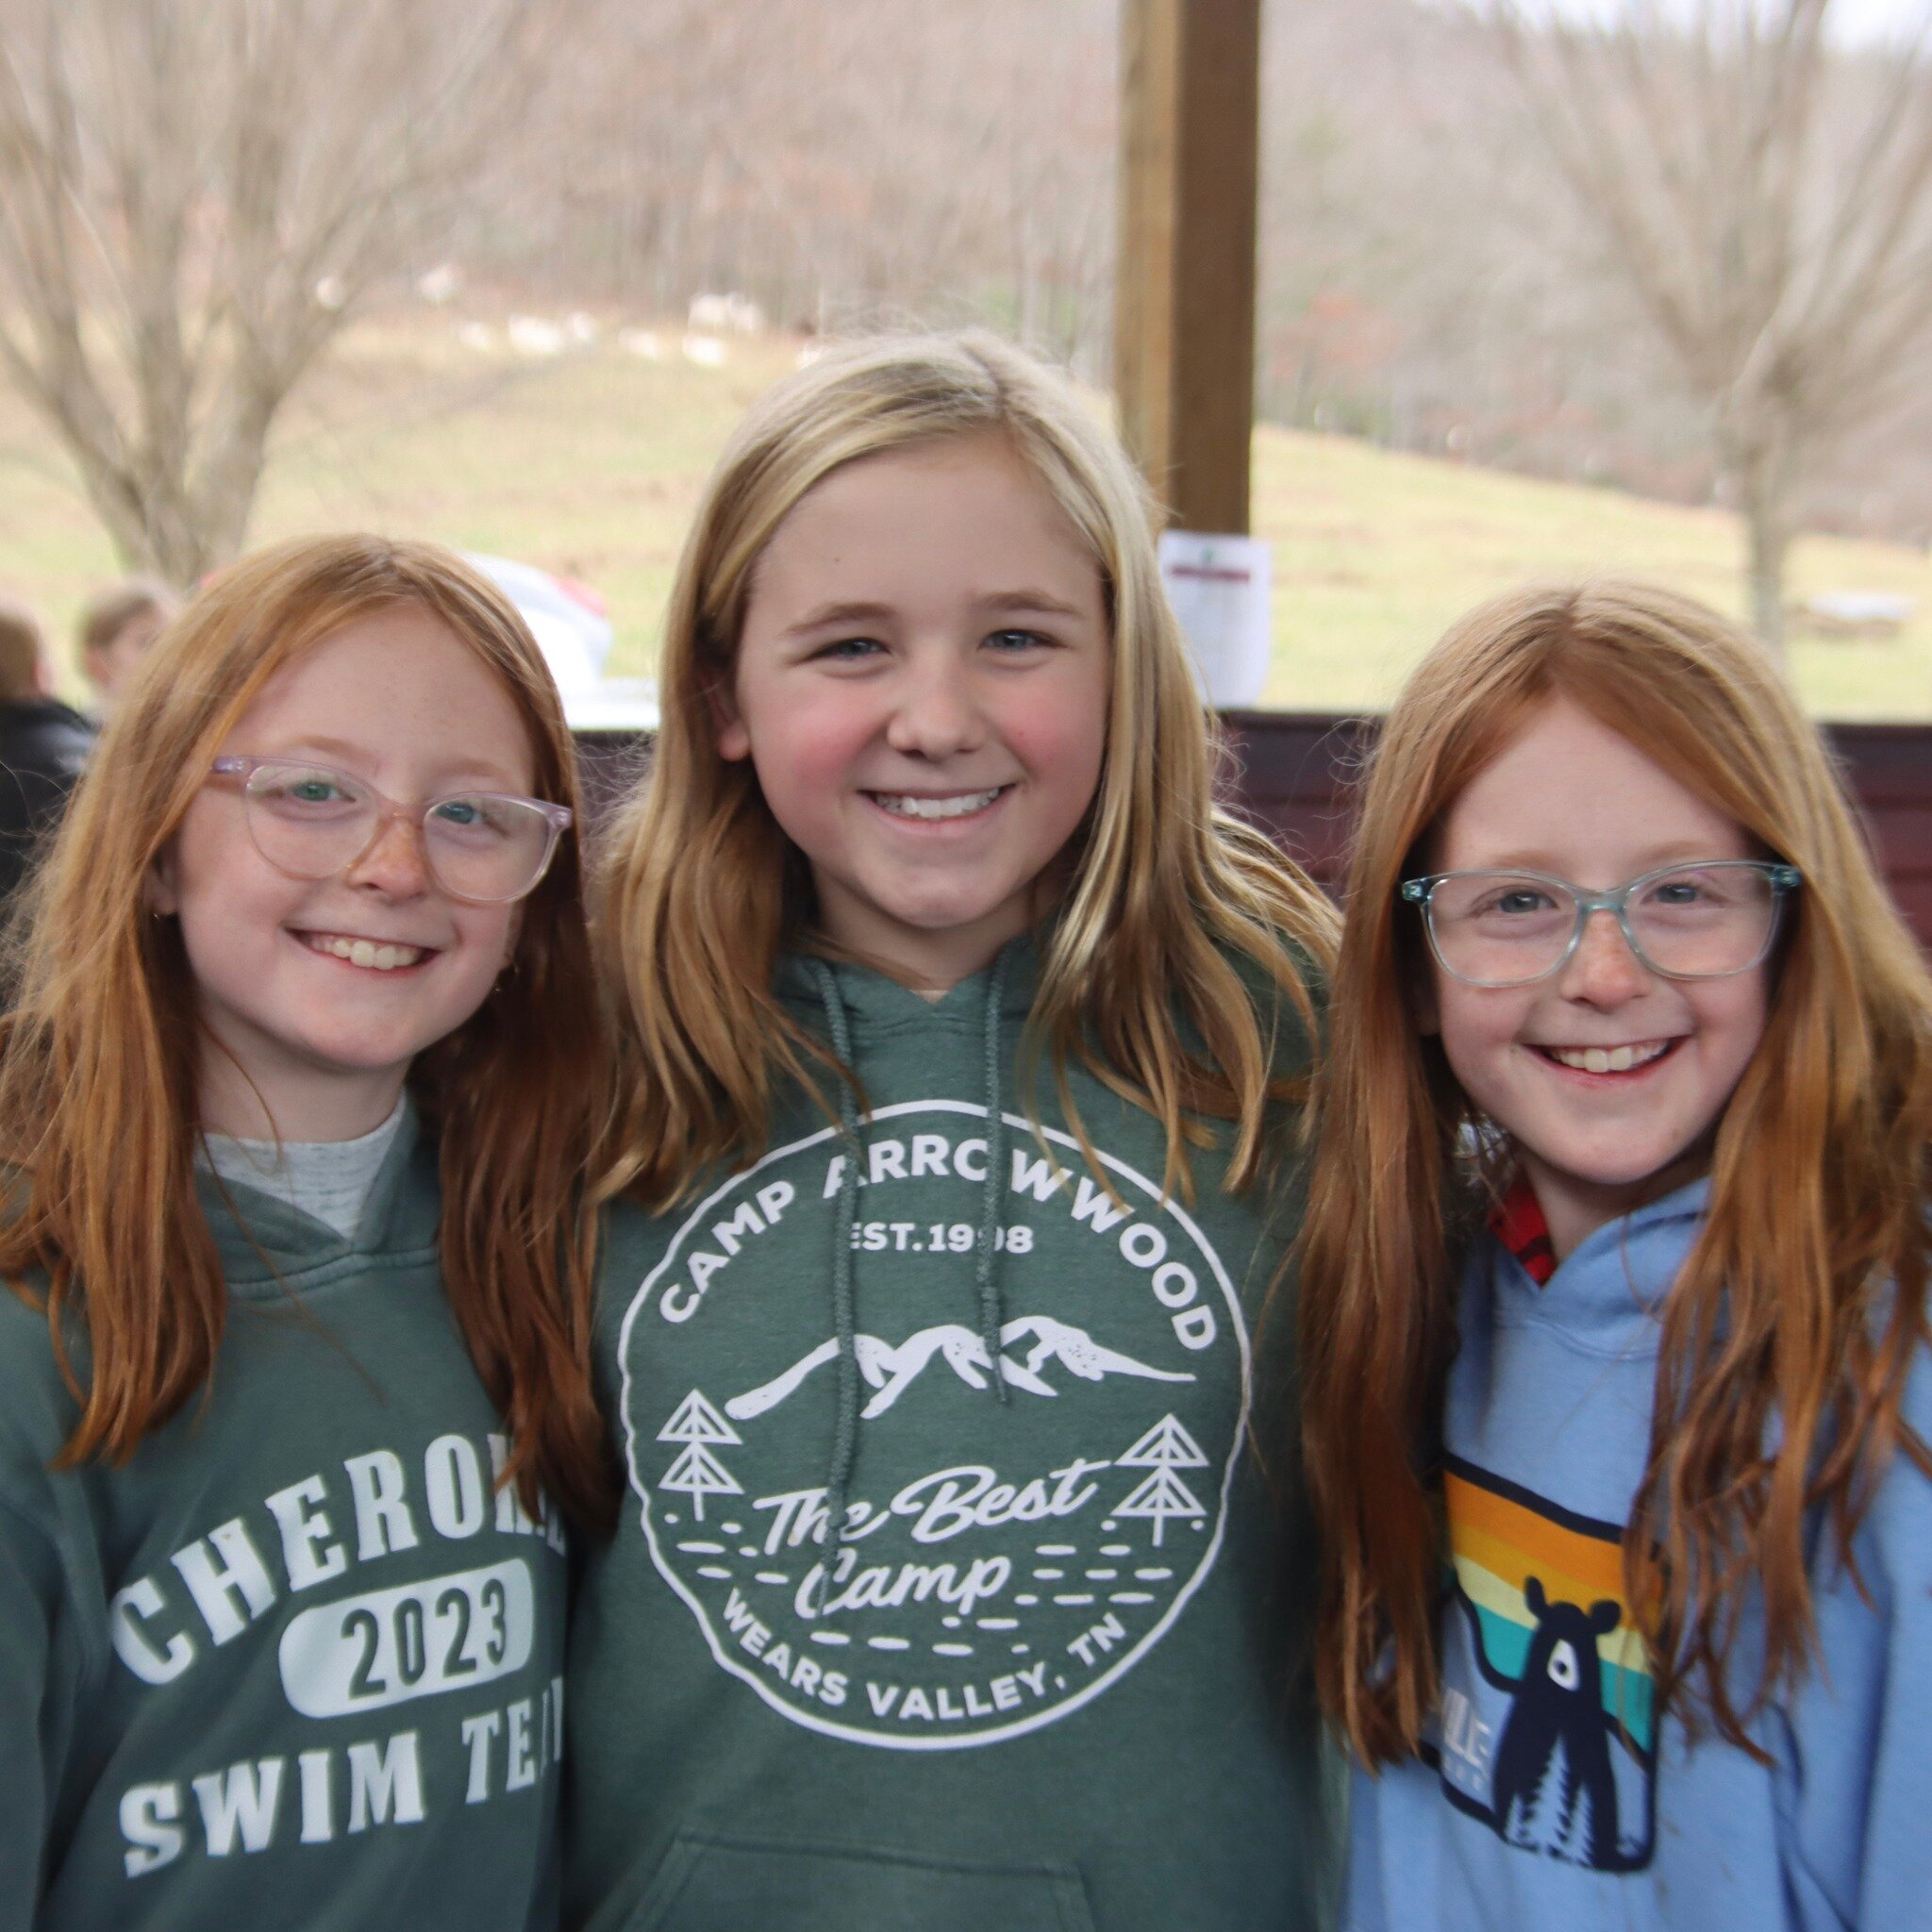 We love to welcome new campers to our Camp Family. Here is what their parents shared with us:&quot;This was our first experience at Camp Arrowwood and it is easy to see why it is so beloved. Thank you for nurturing our child&rsquo;s spiritual life in